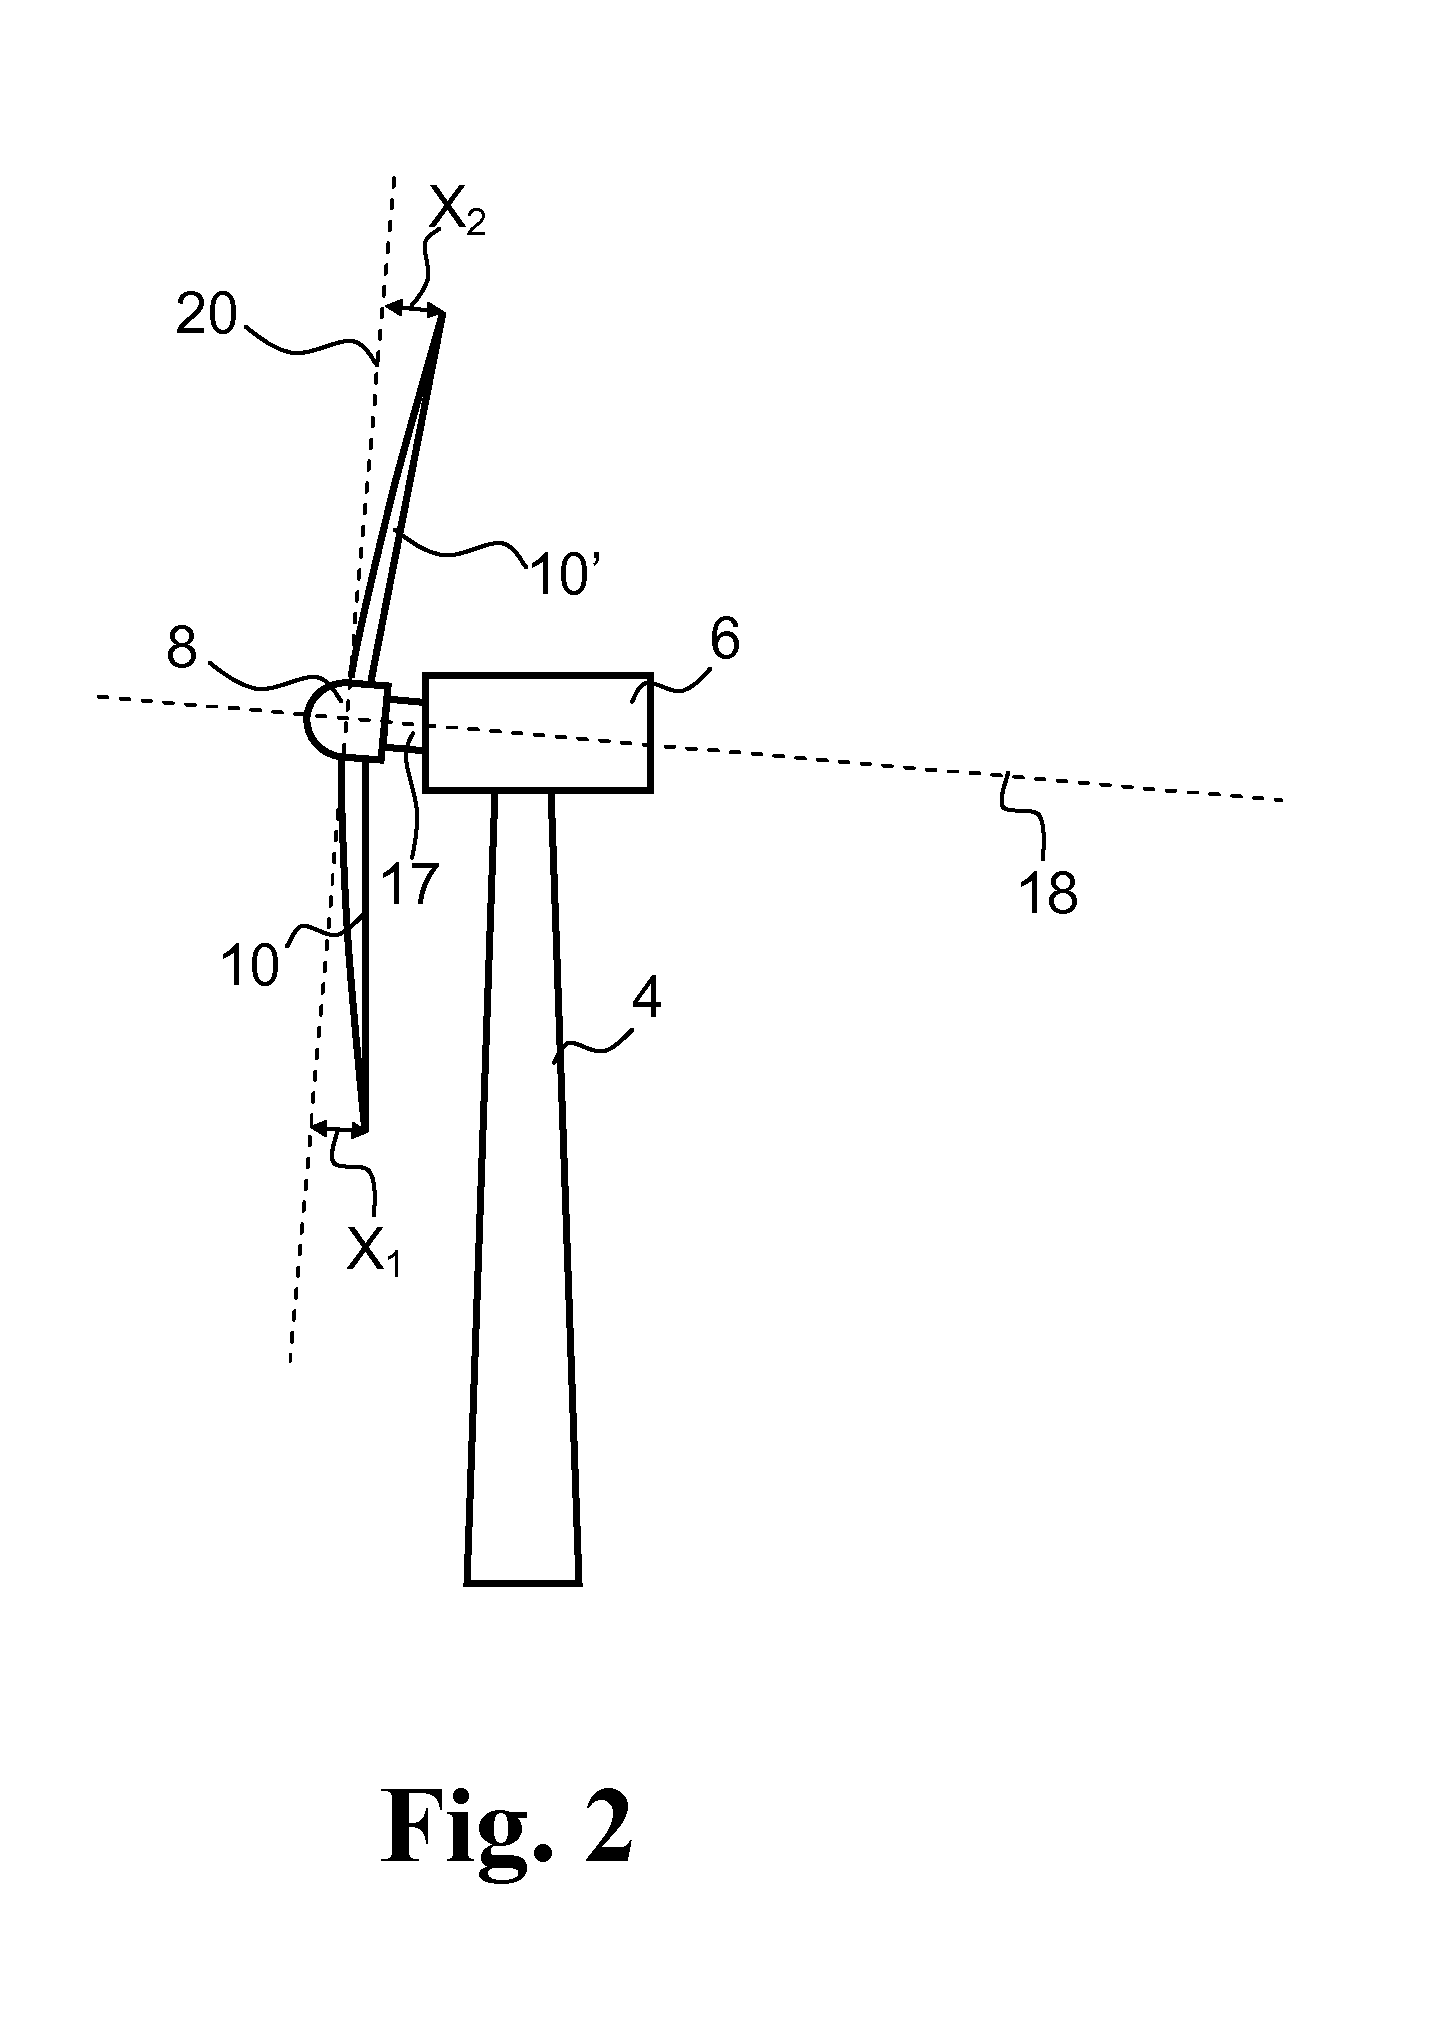 Method of controlling a wind turbine and related system